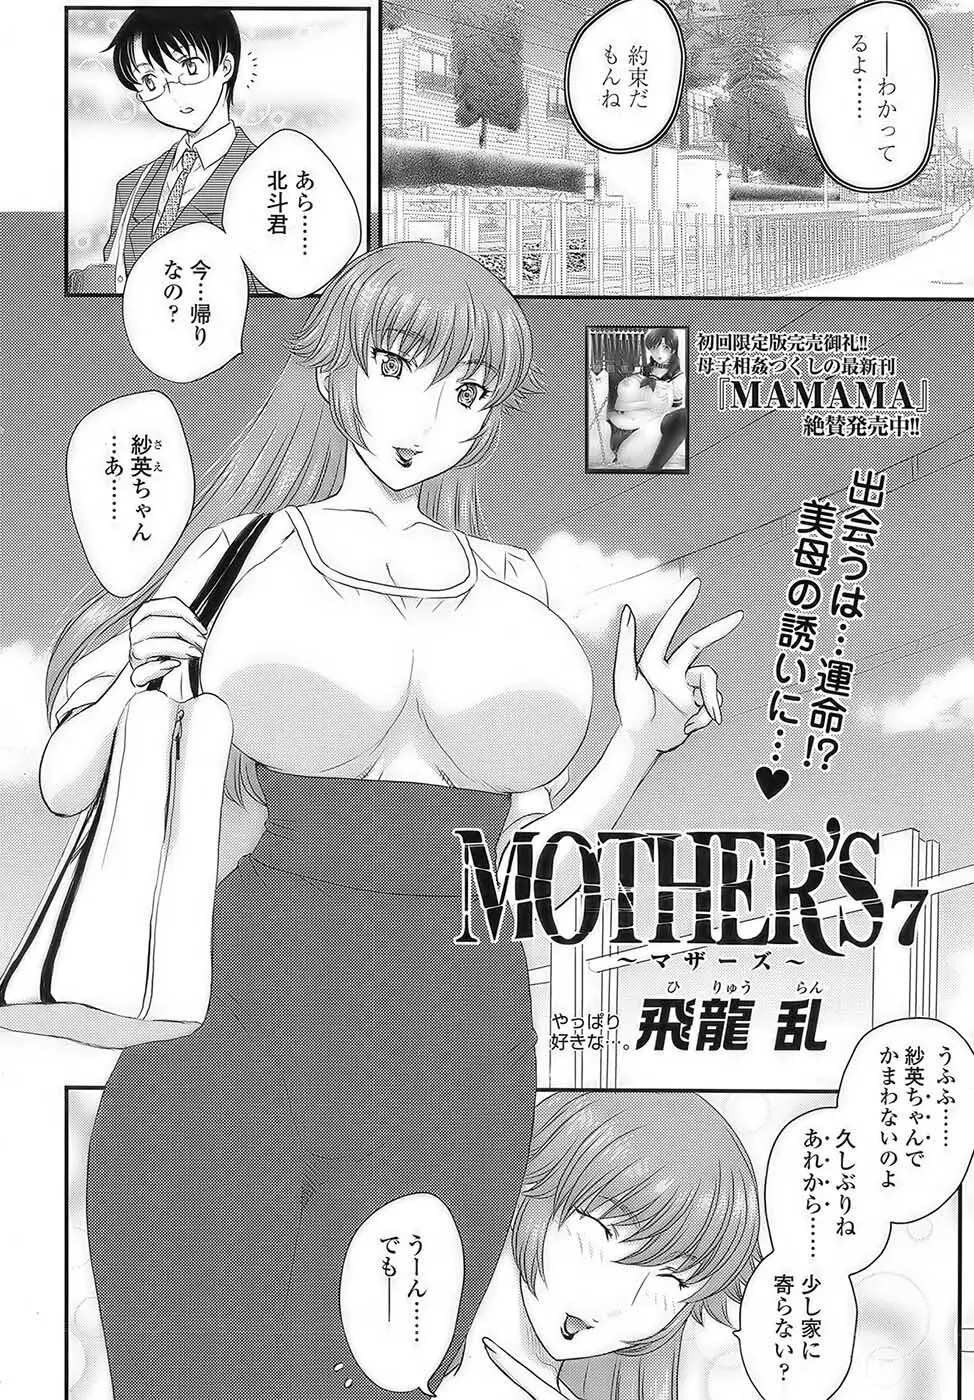 MOTHER’S 第1-9話 99ページ